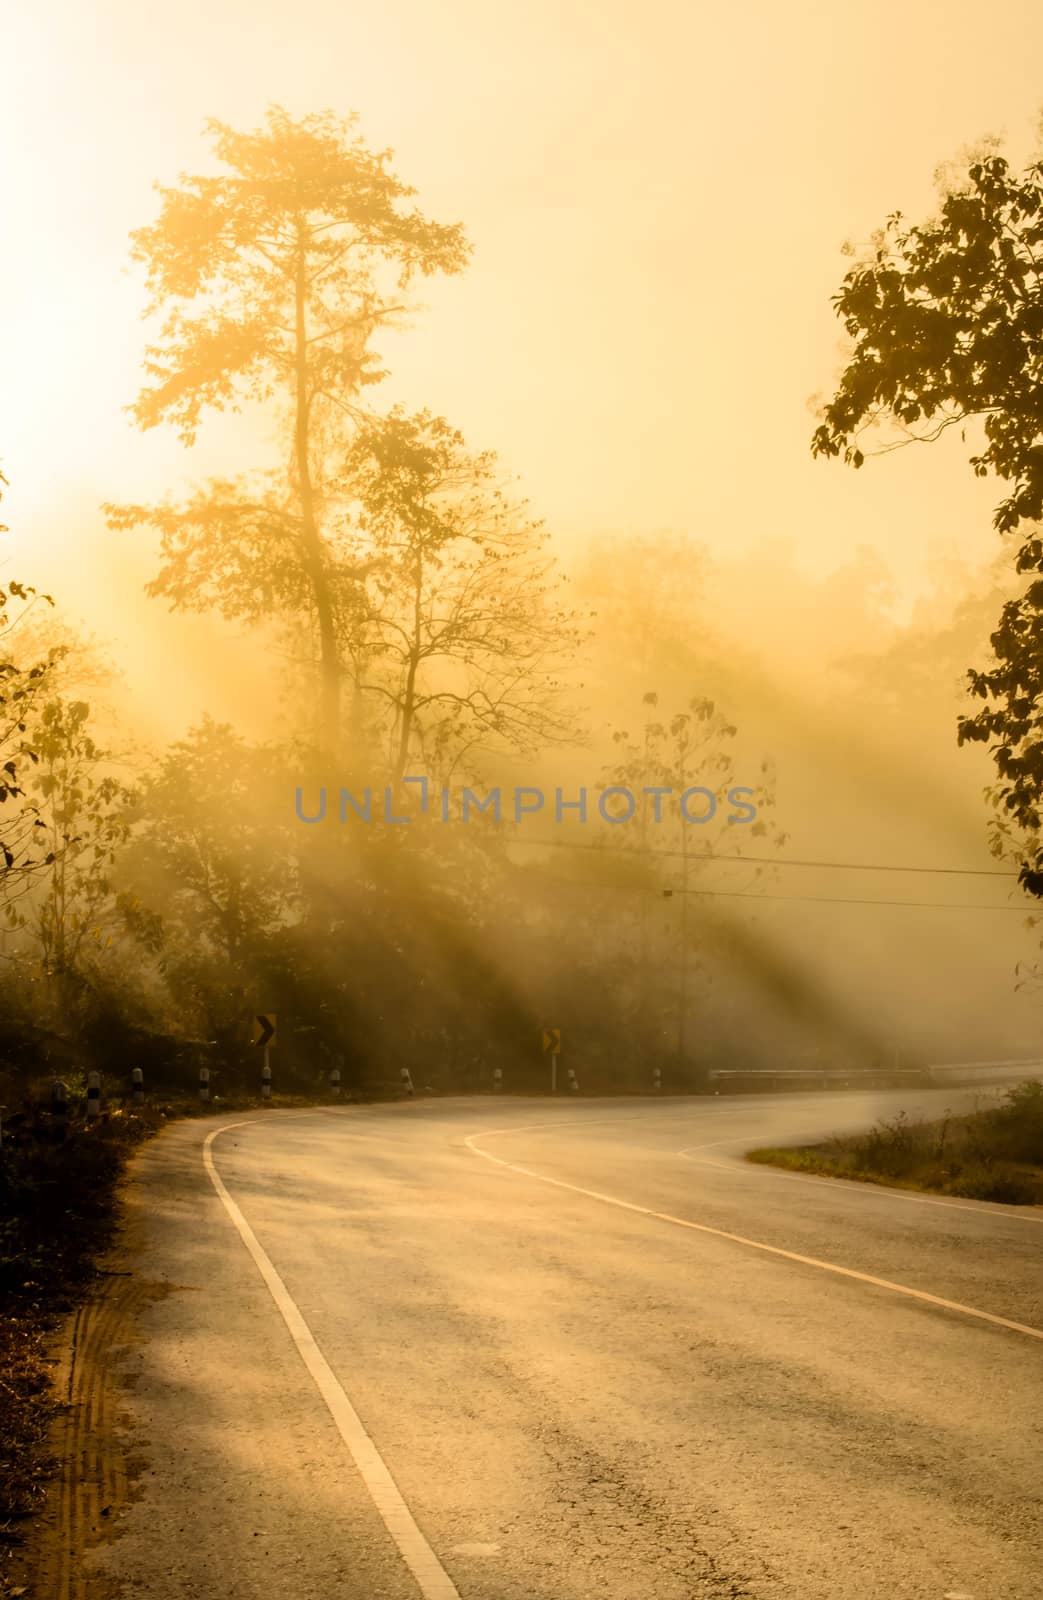 Silhouette Tree and Road with Sunbeam by kobfujar